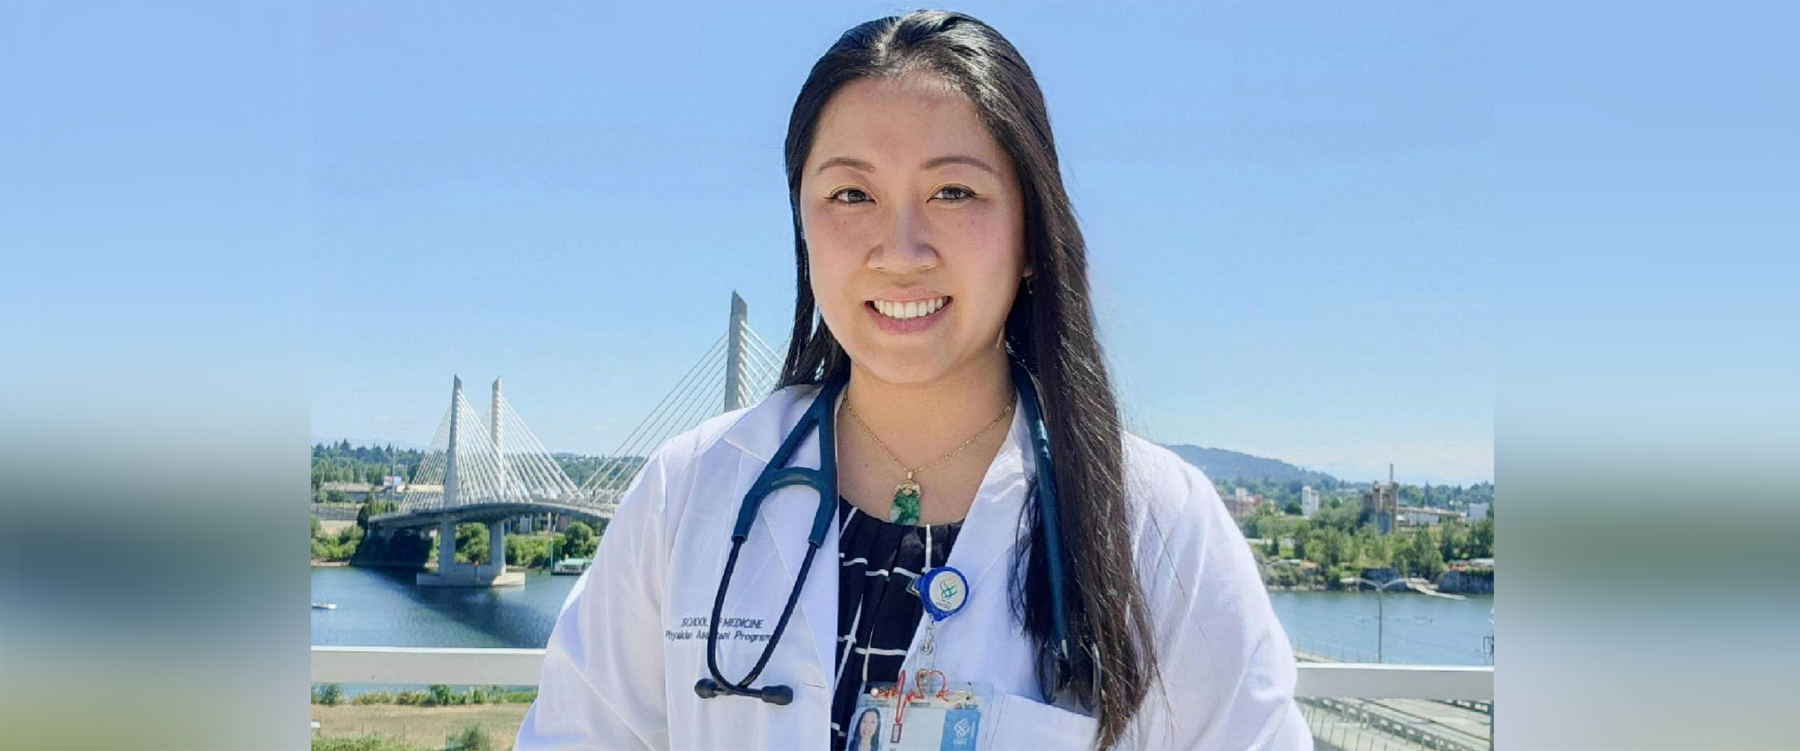 OHSU PA student committed to address state rural health needs 